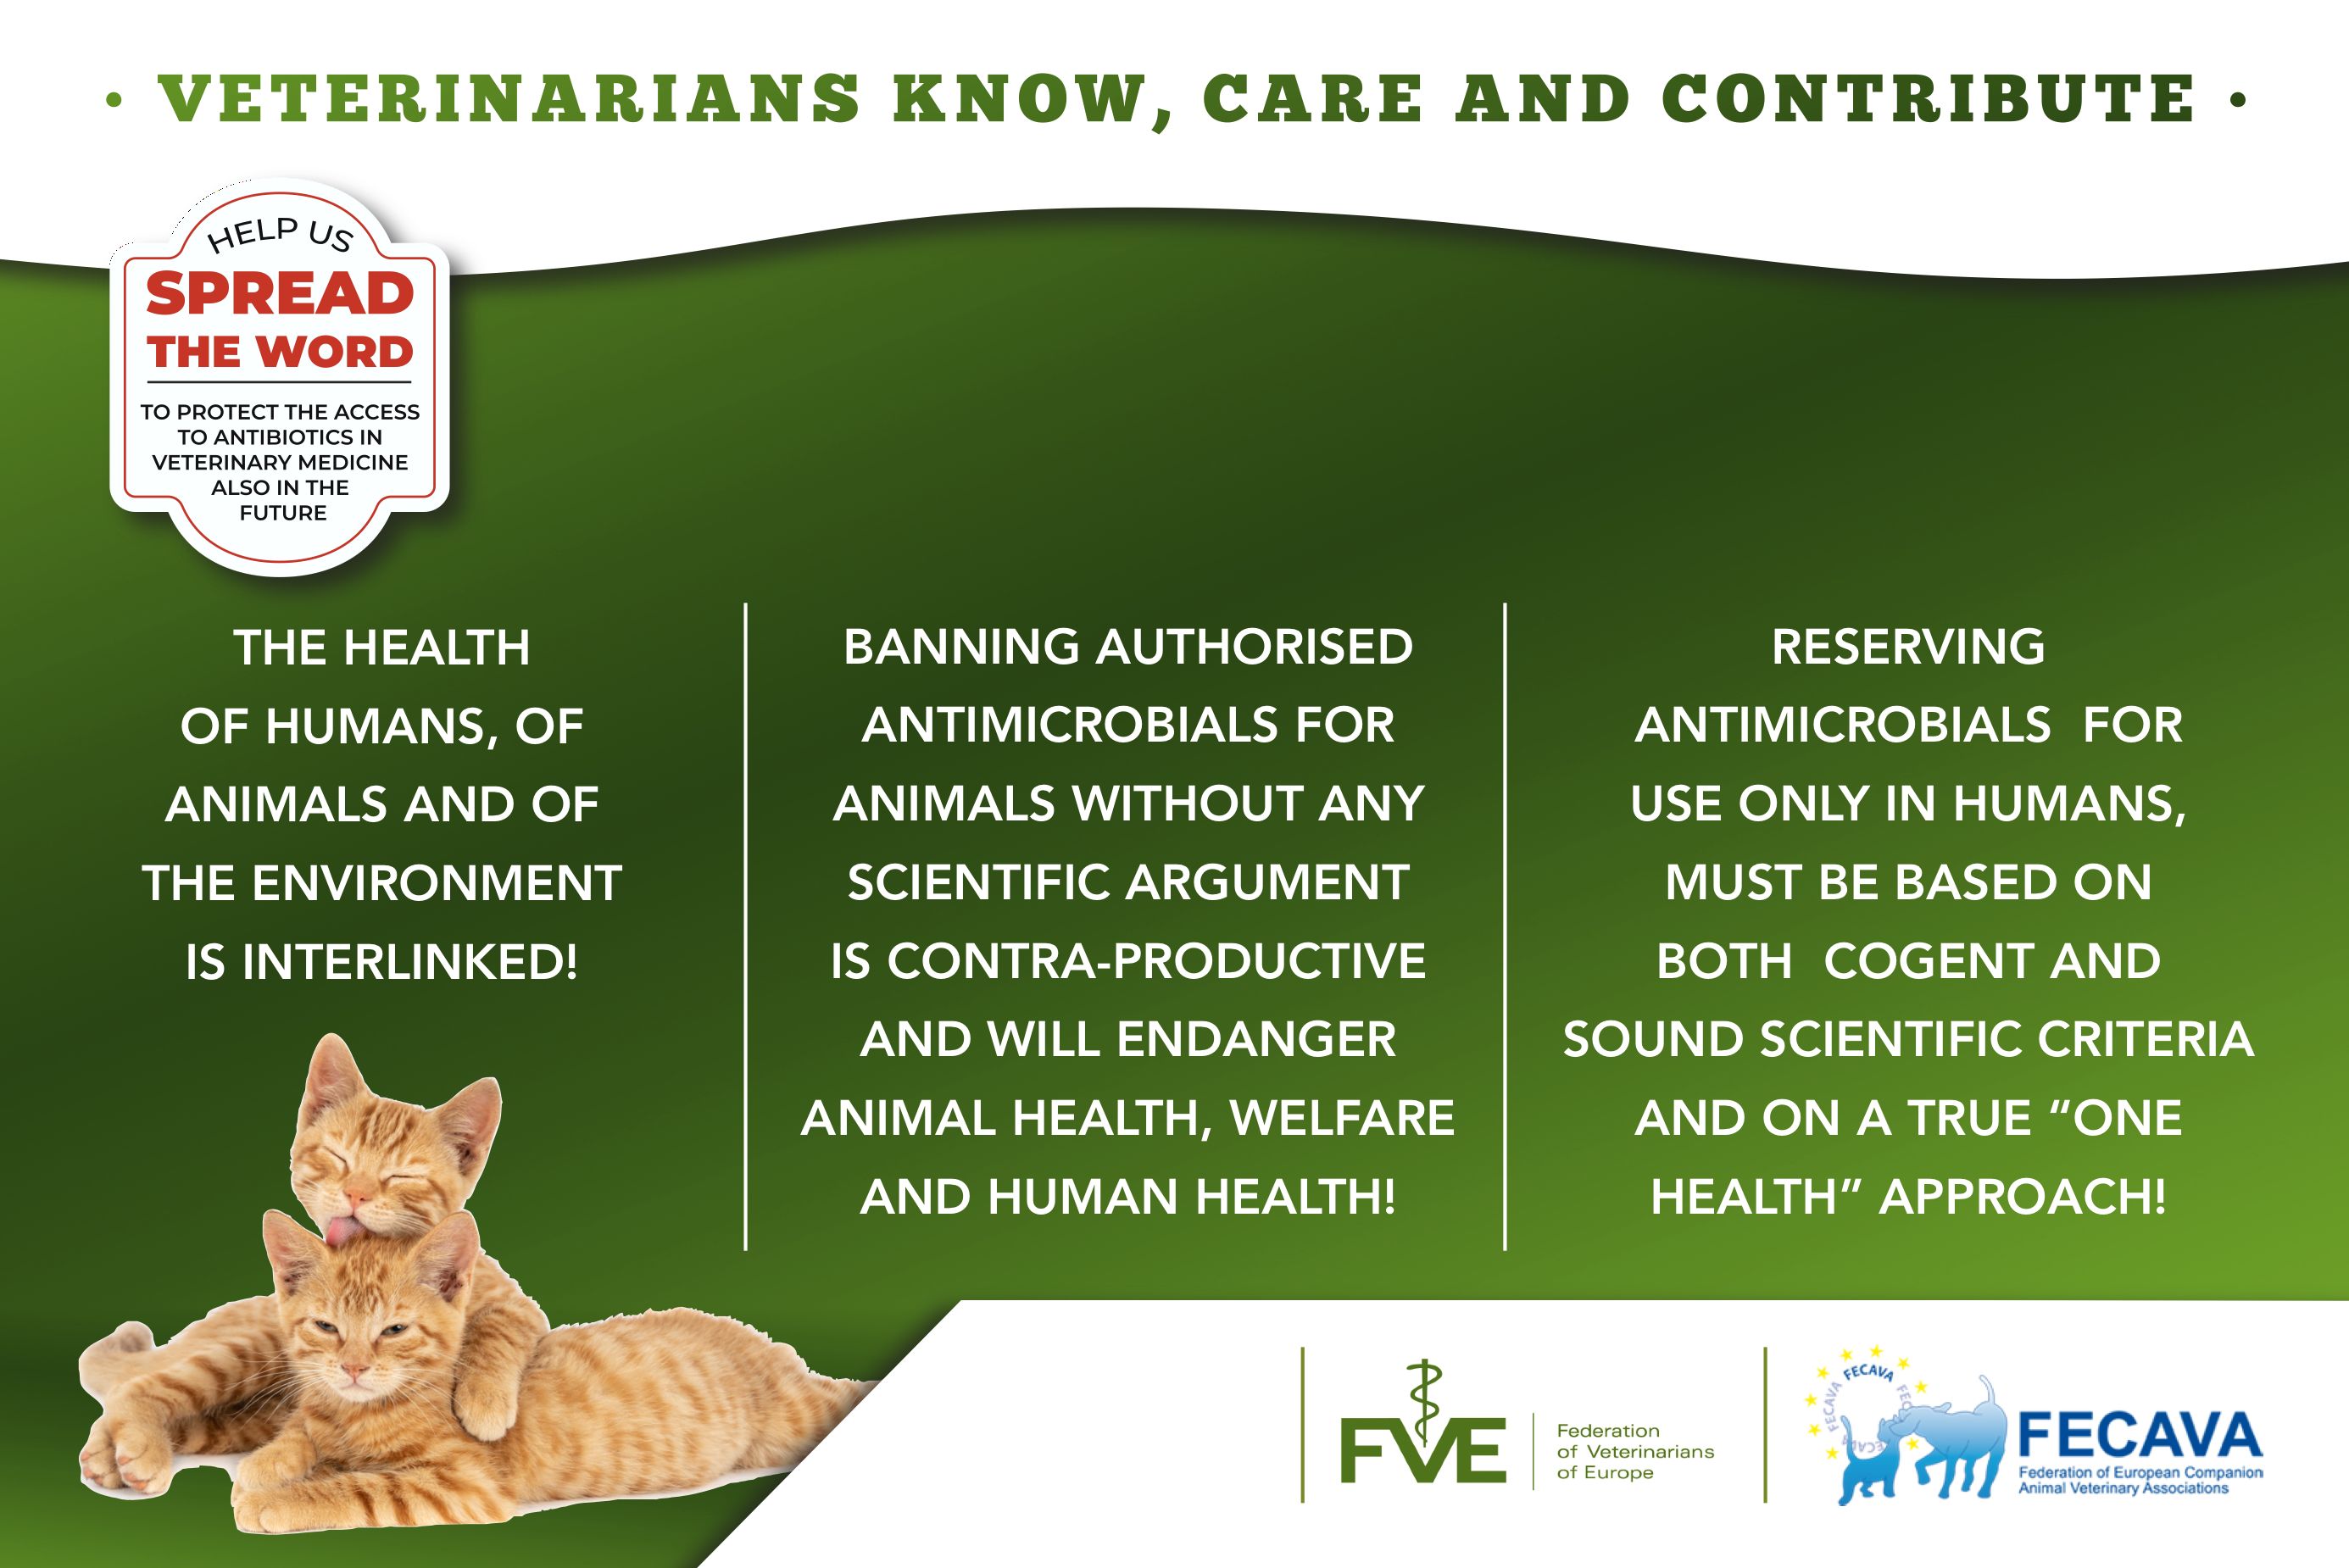 Banning authorized antimicrobials without scientific evidence will cause  animal suffering and will endanger public health - FECAVA